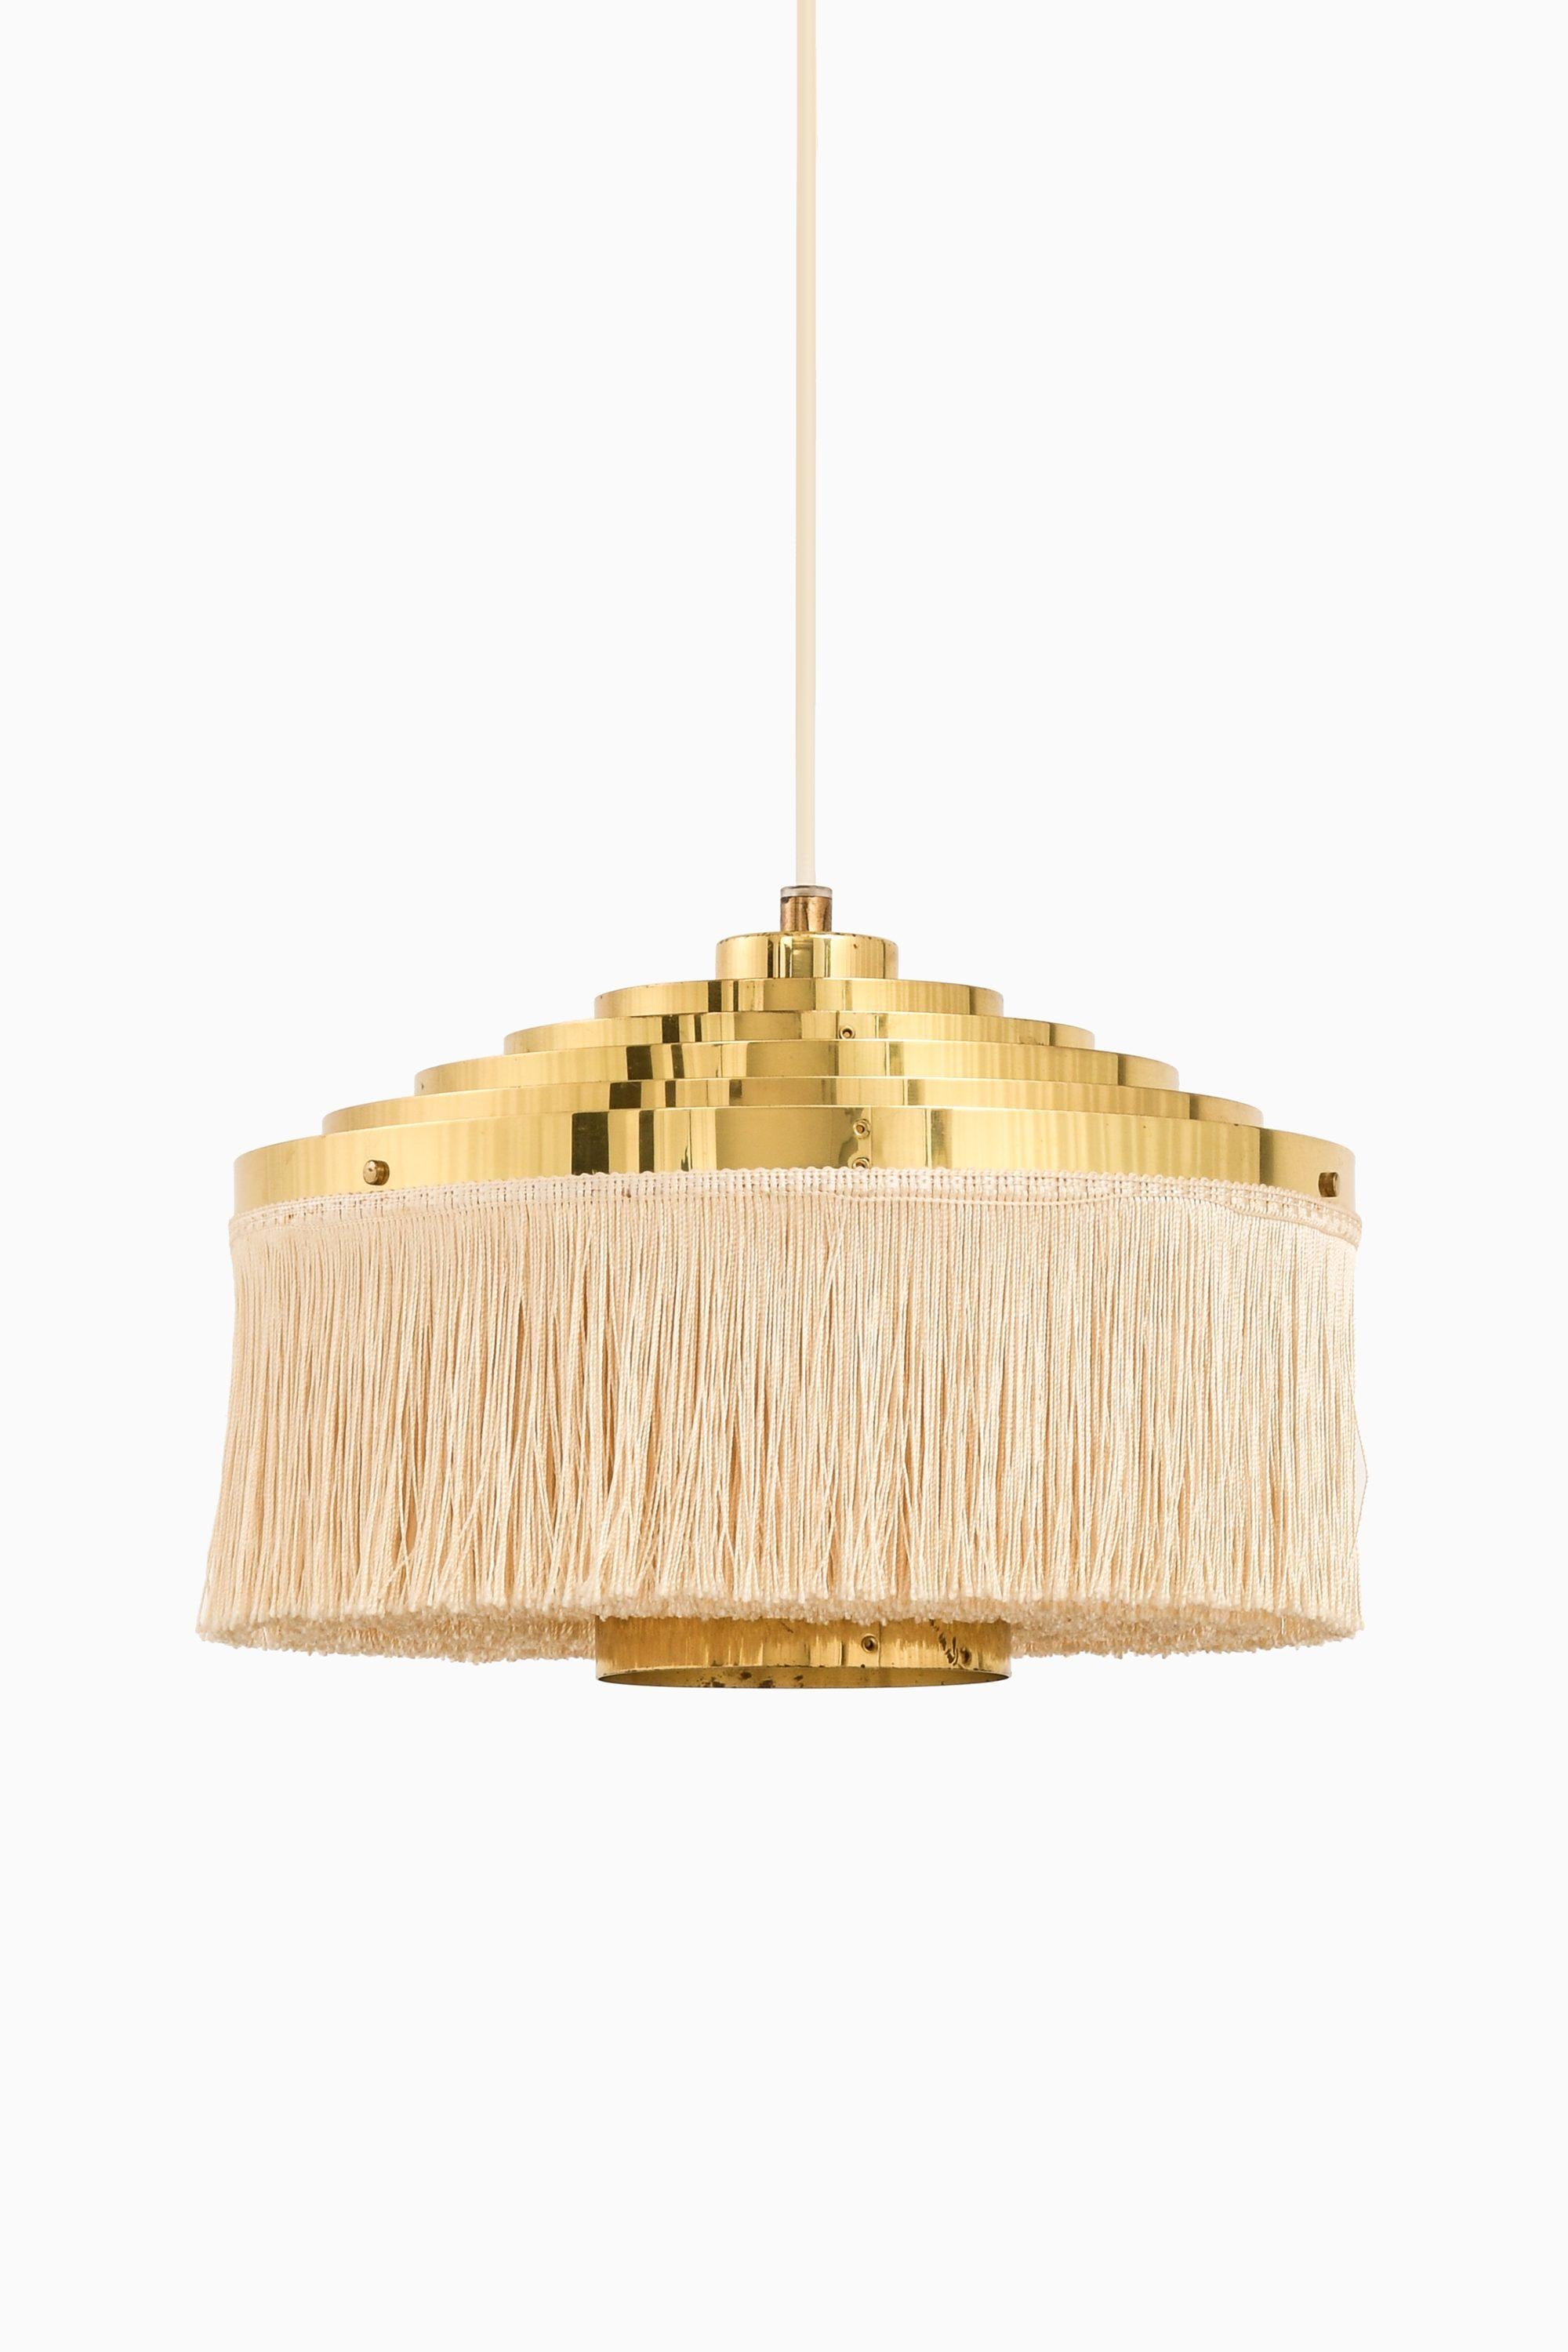 Ceiling Lamp in Brass and Silk Fringes by Hans-Agne Jakobsson, 1950's

Additional Information:
Material: Brass and silk fringes
Style: Mid century, Scandinavian
Produced by Hans-Agne Jakobsson AB in Markaryd, Sweden
Dimensions (W x D x H): 29 x 29 x